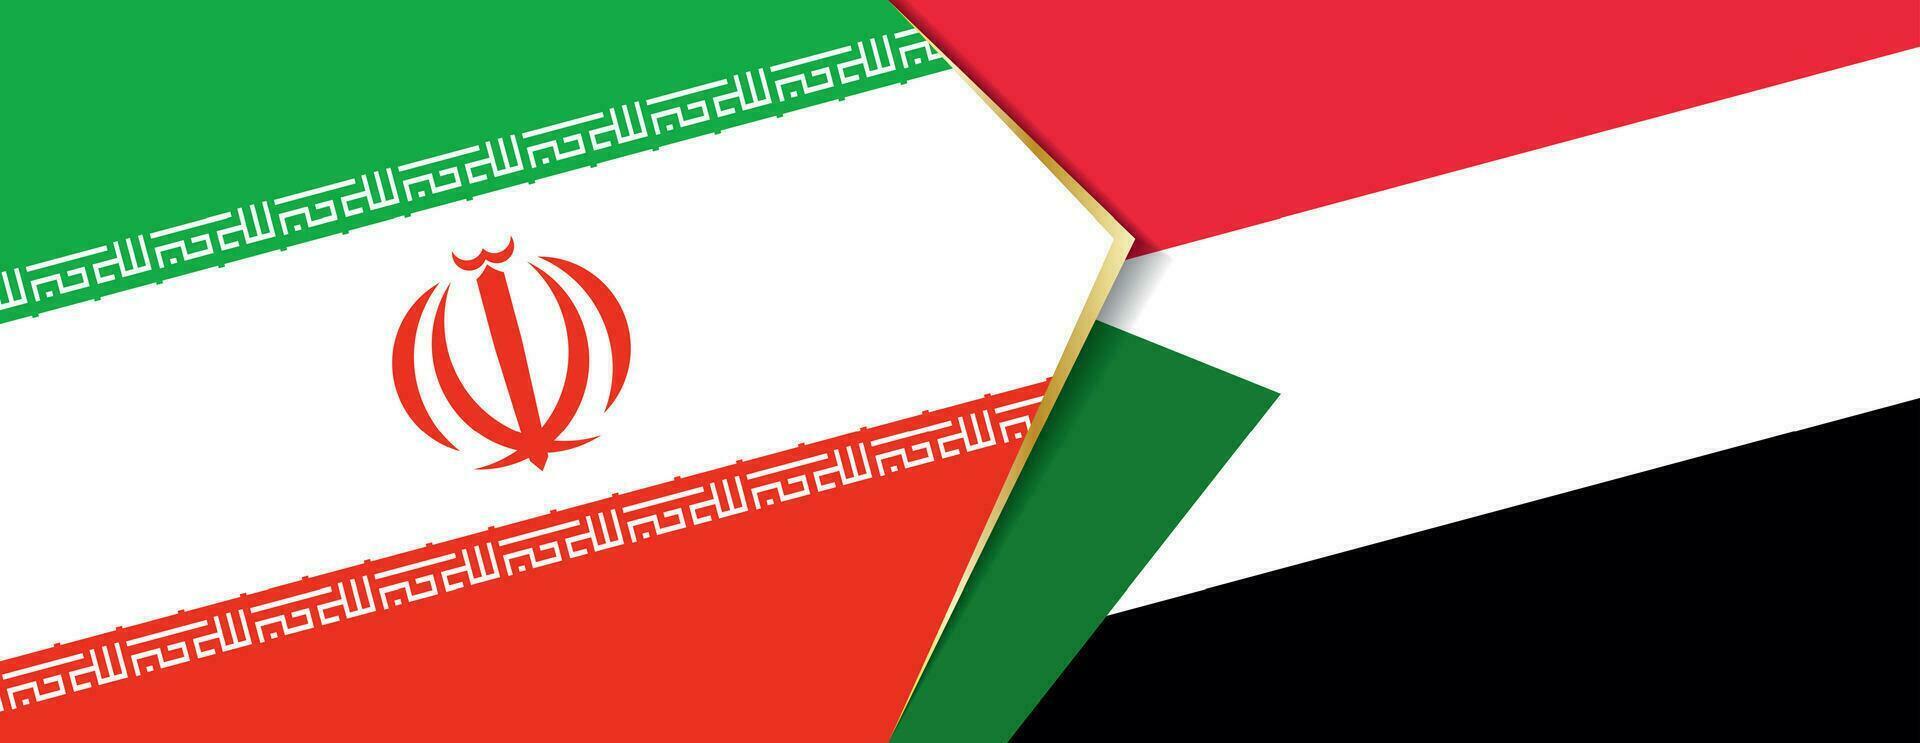 Iran and Sudan flags, two vector flags.